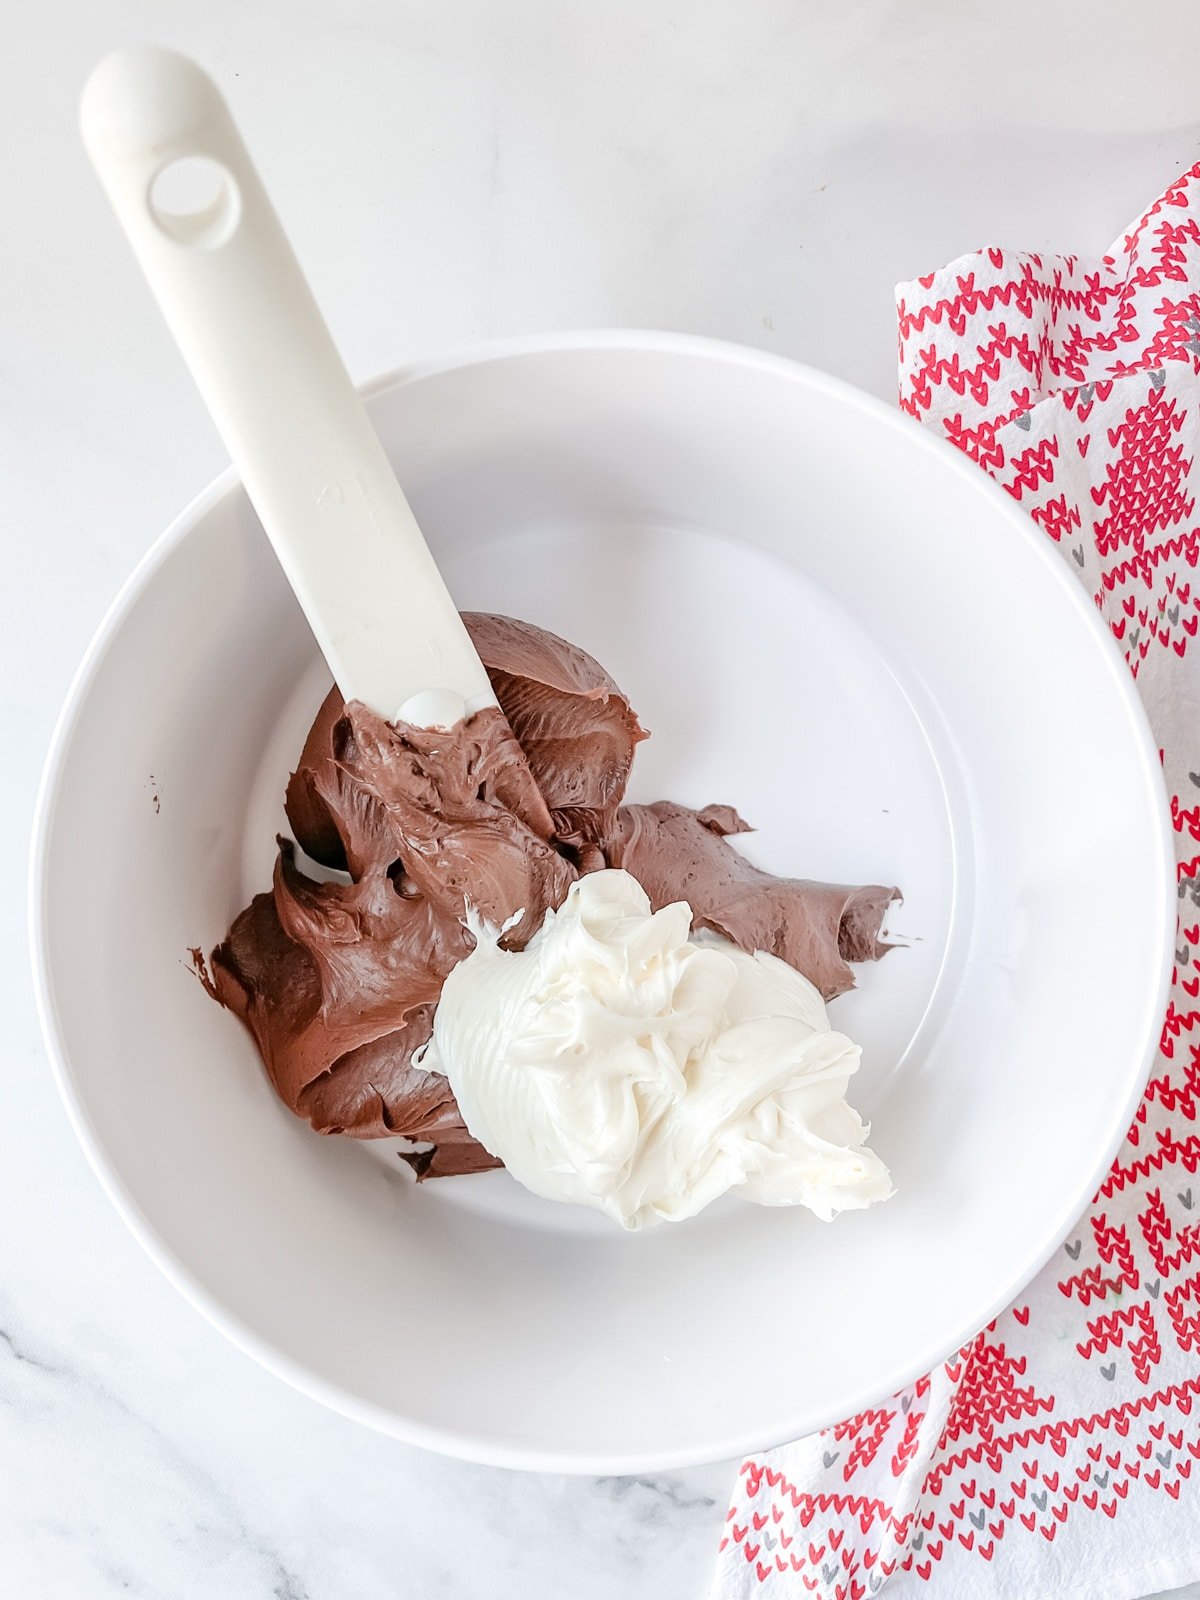 mix together chocolate and vanilla frosting